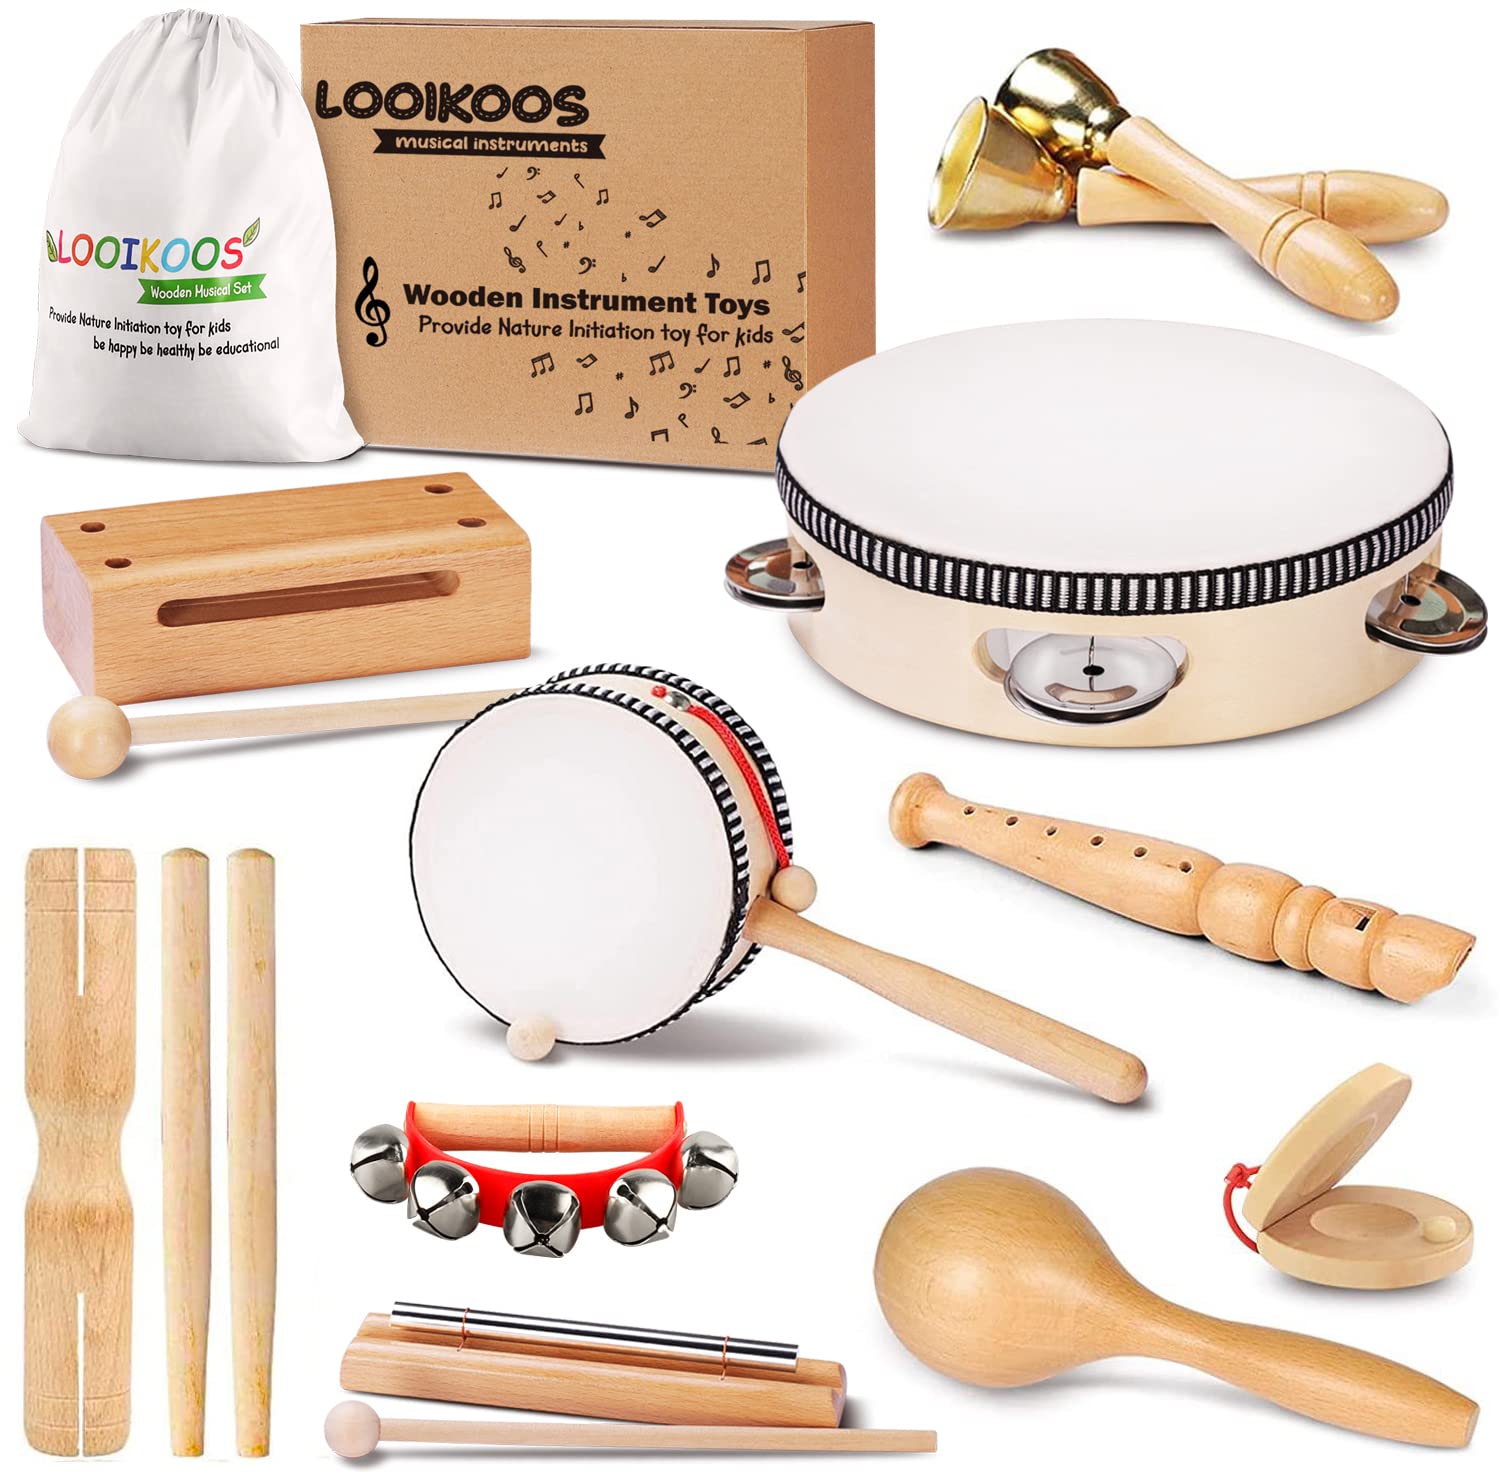 Looikoos Toddler Musical Instruments, Eco Friendly Musical Set For Kids Preschool Educational, Natural Wooden Percussion Instrum